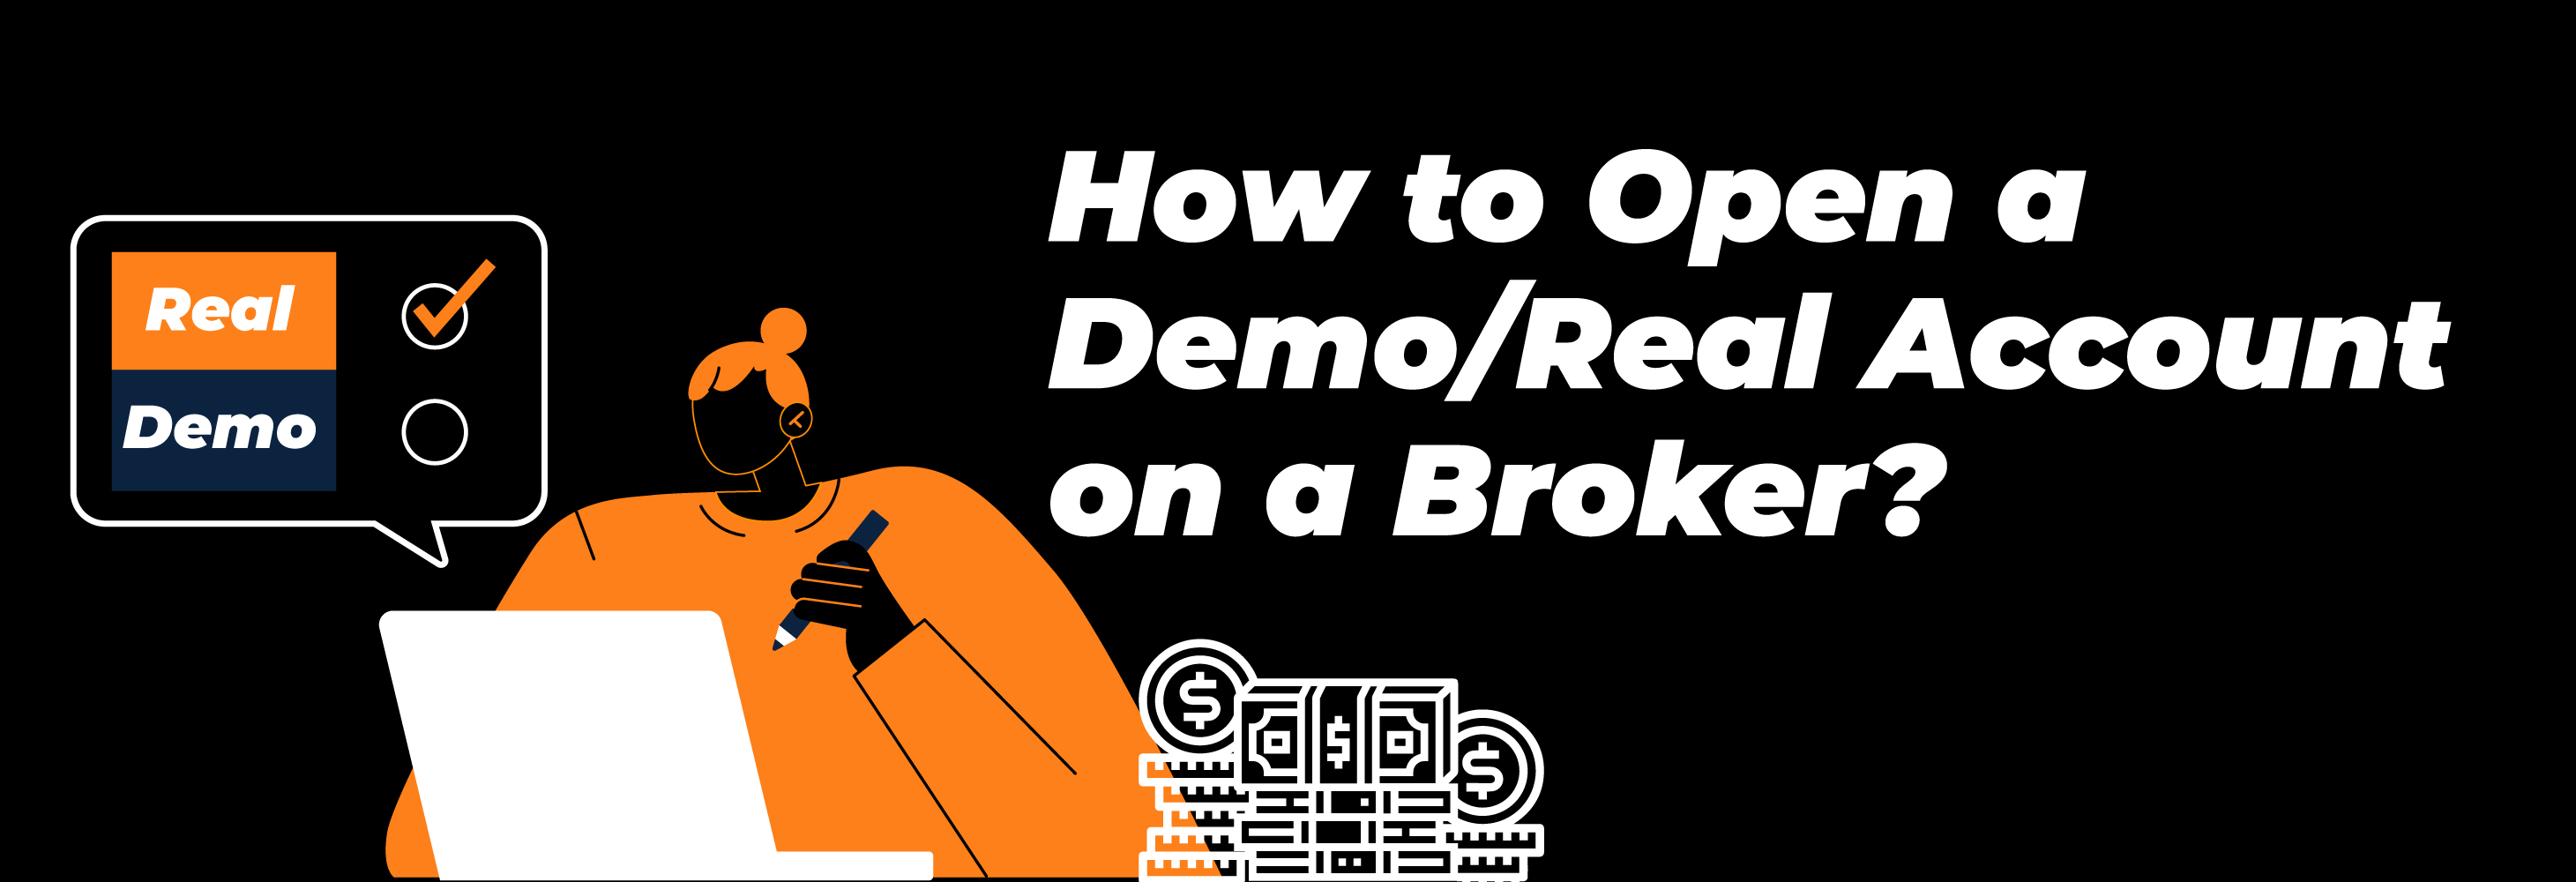 How to Open a Demo/Real Account on a Broker?